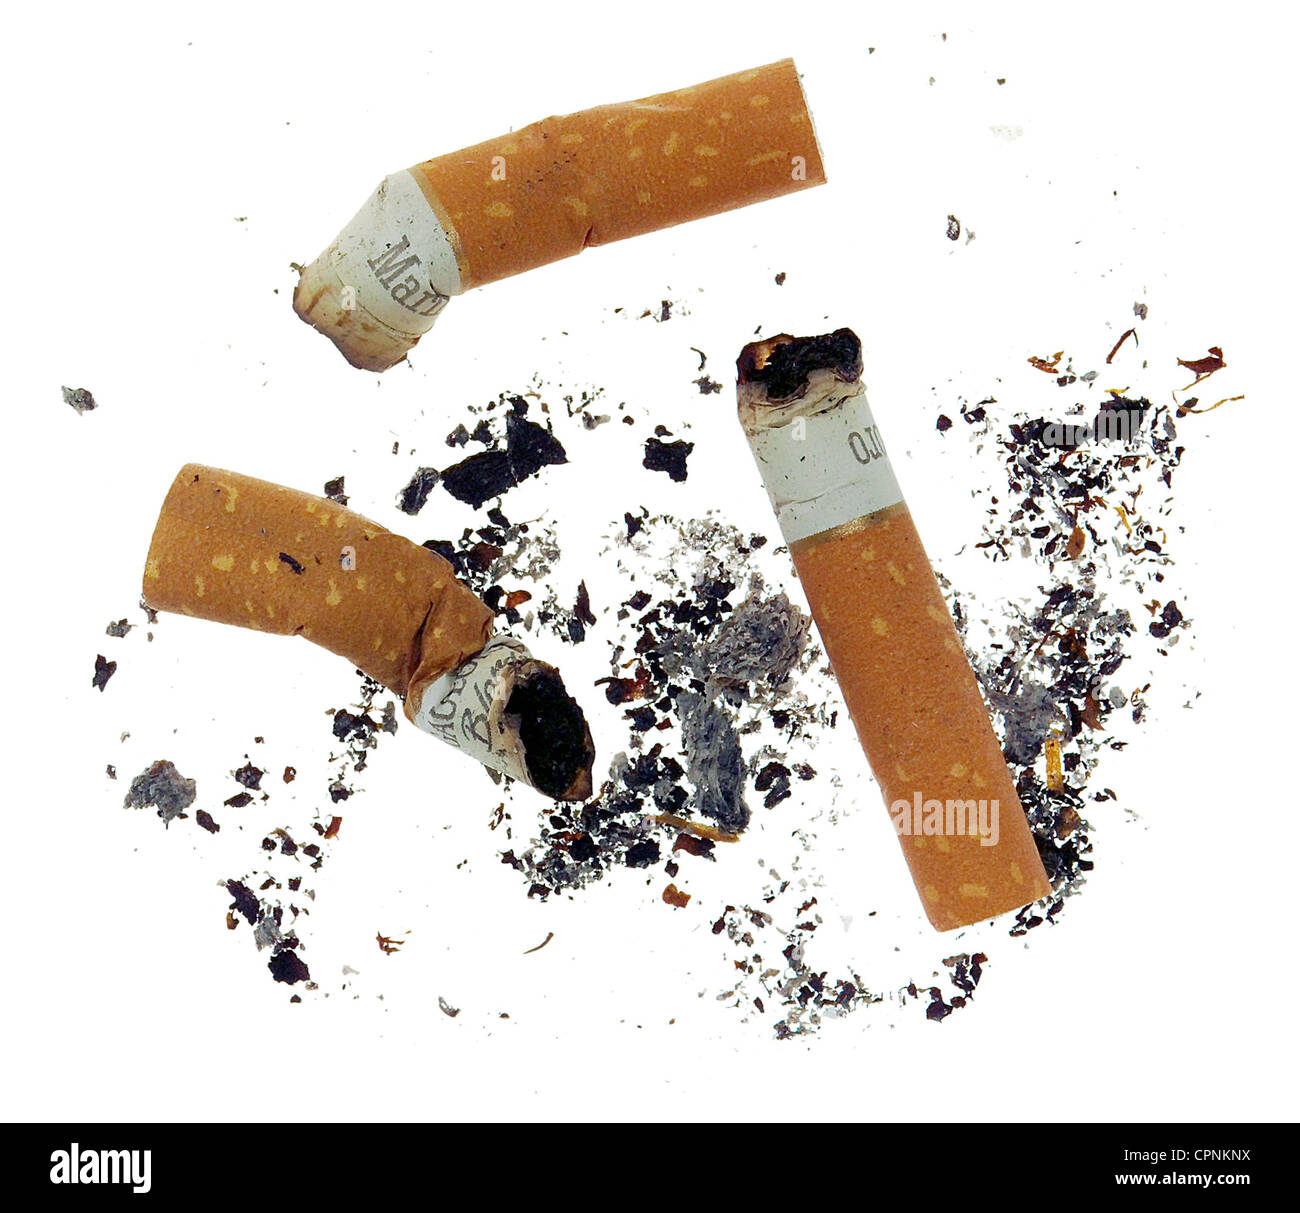 tobacco, three stub, cigarette ash, Marlboro, Gauloise, Germany, Additional-Rights-Clearance-Info-Not-Available Stock Photo